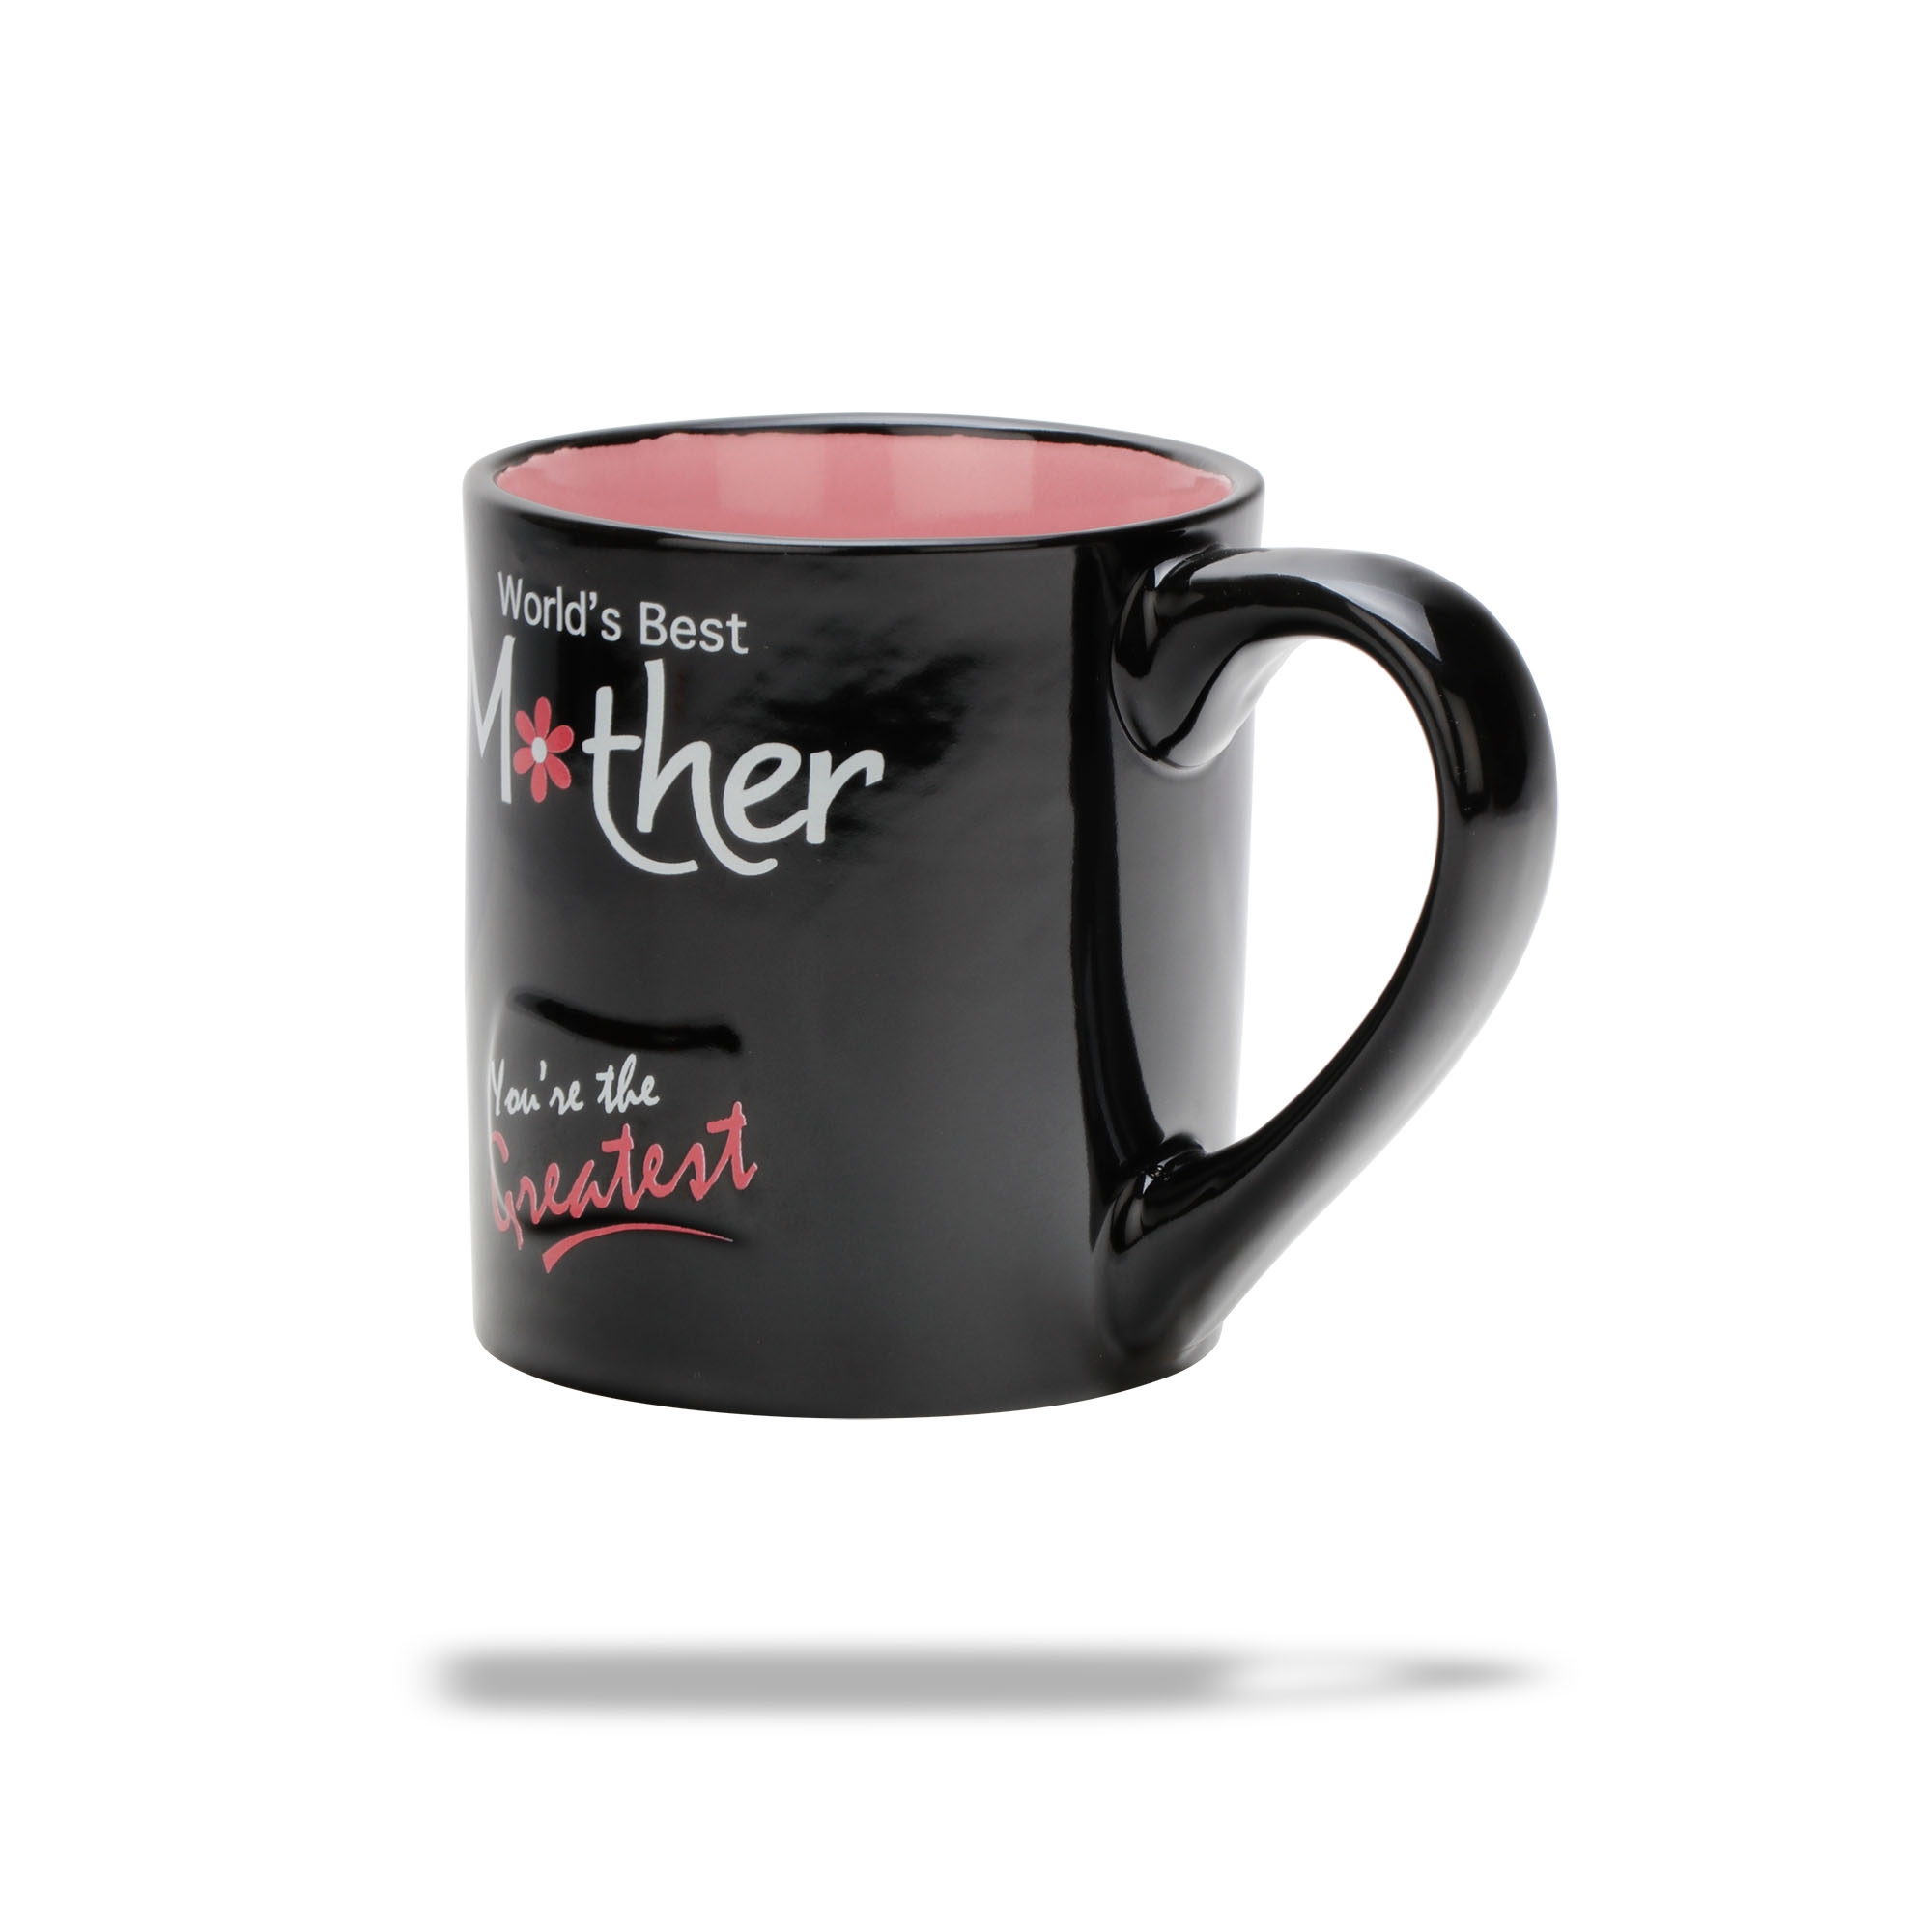 ARCHIES CERAMIC COFFEE MUG WITH WORLD'S BEST MOTHER PRINTED 